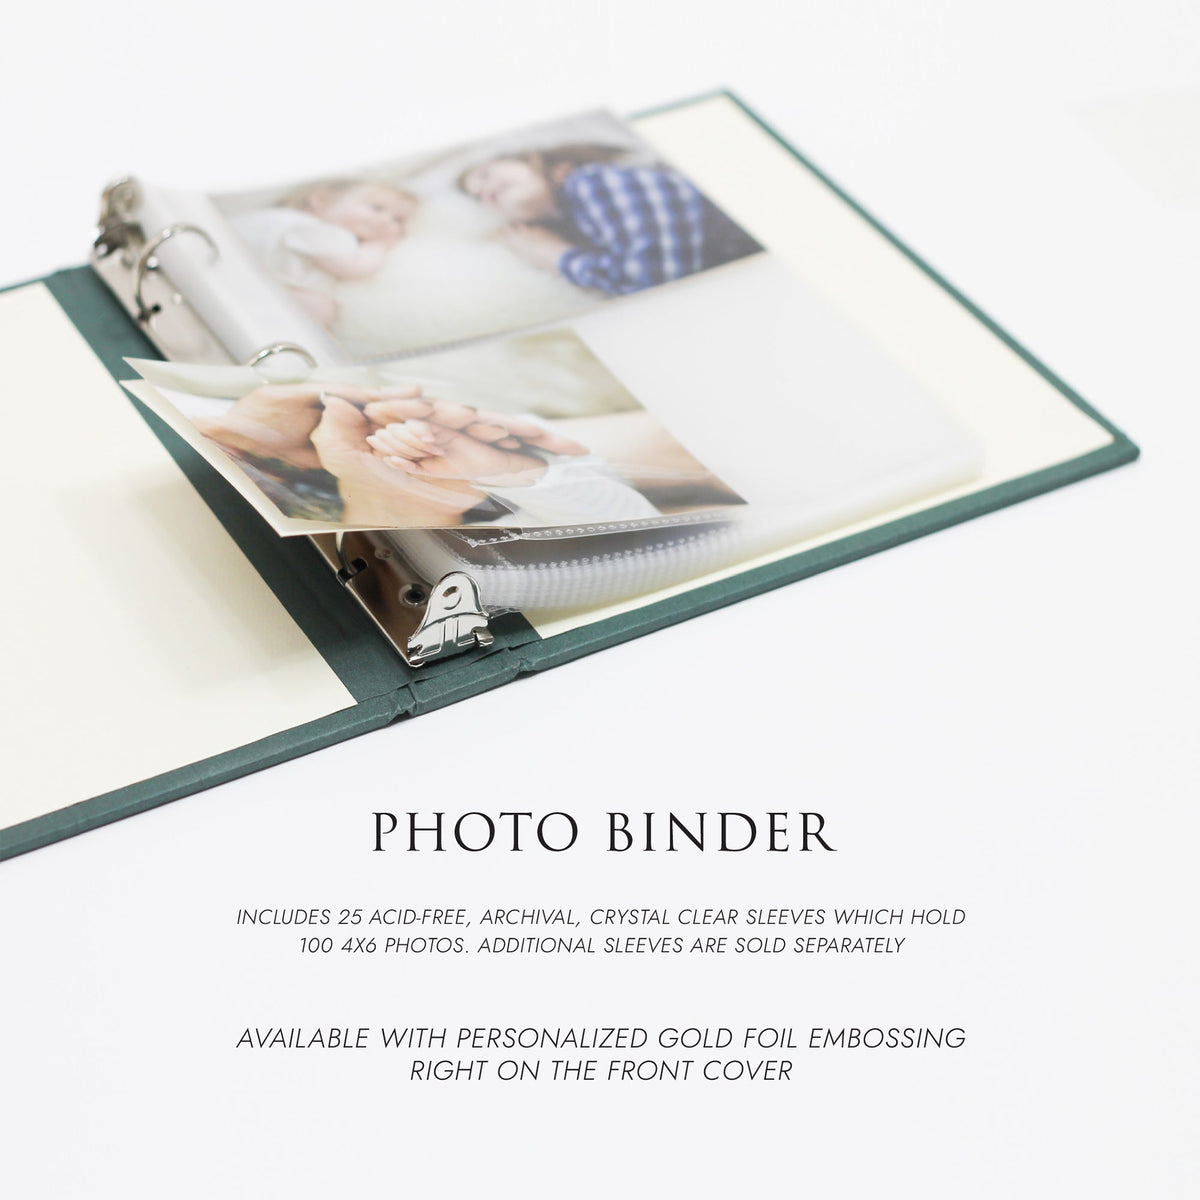 Medium Photo Binder For 4x6 Photos | Cover: Celery Cotton | Available Personalized